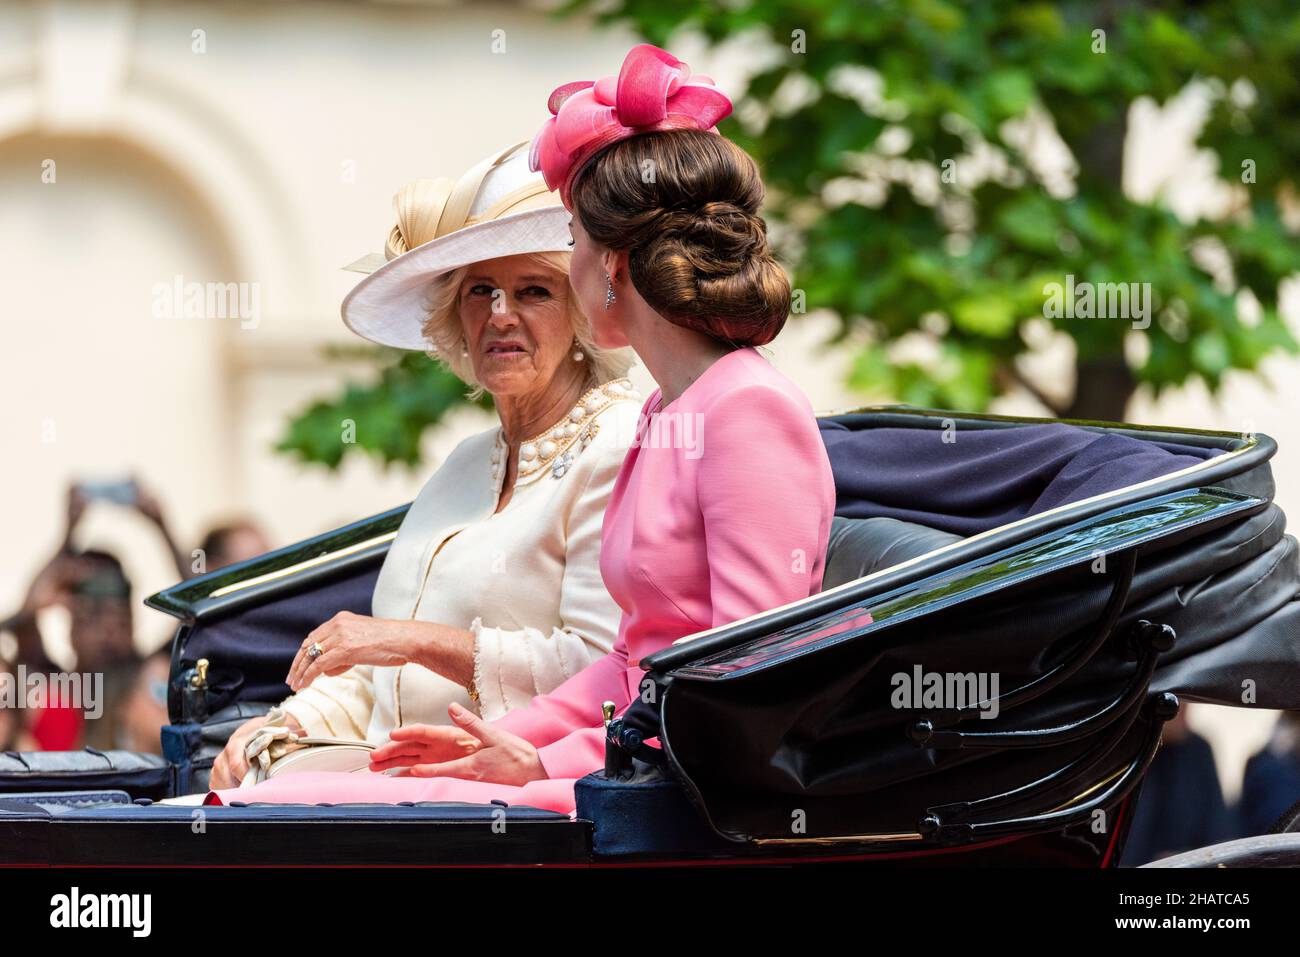 Duchesses of Cambridge and Cornwall at Trooping the Colour 2017, The Mall, London. Kate Middleton and Camilla Parker Bowles in conversation. Women Stock Photo